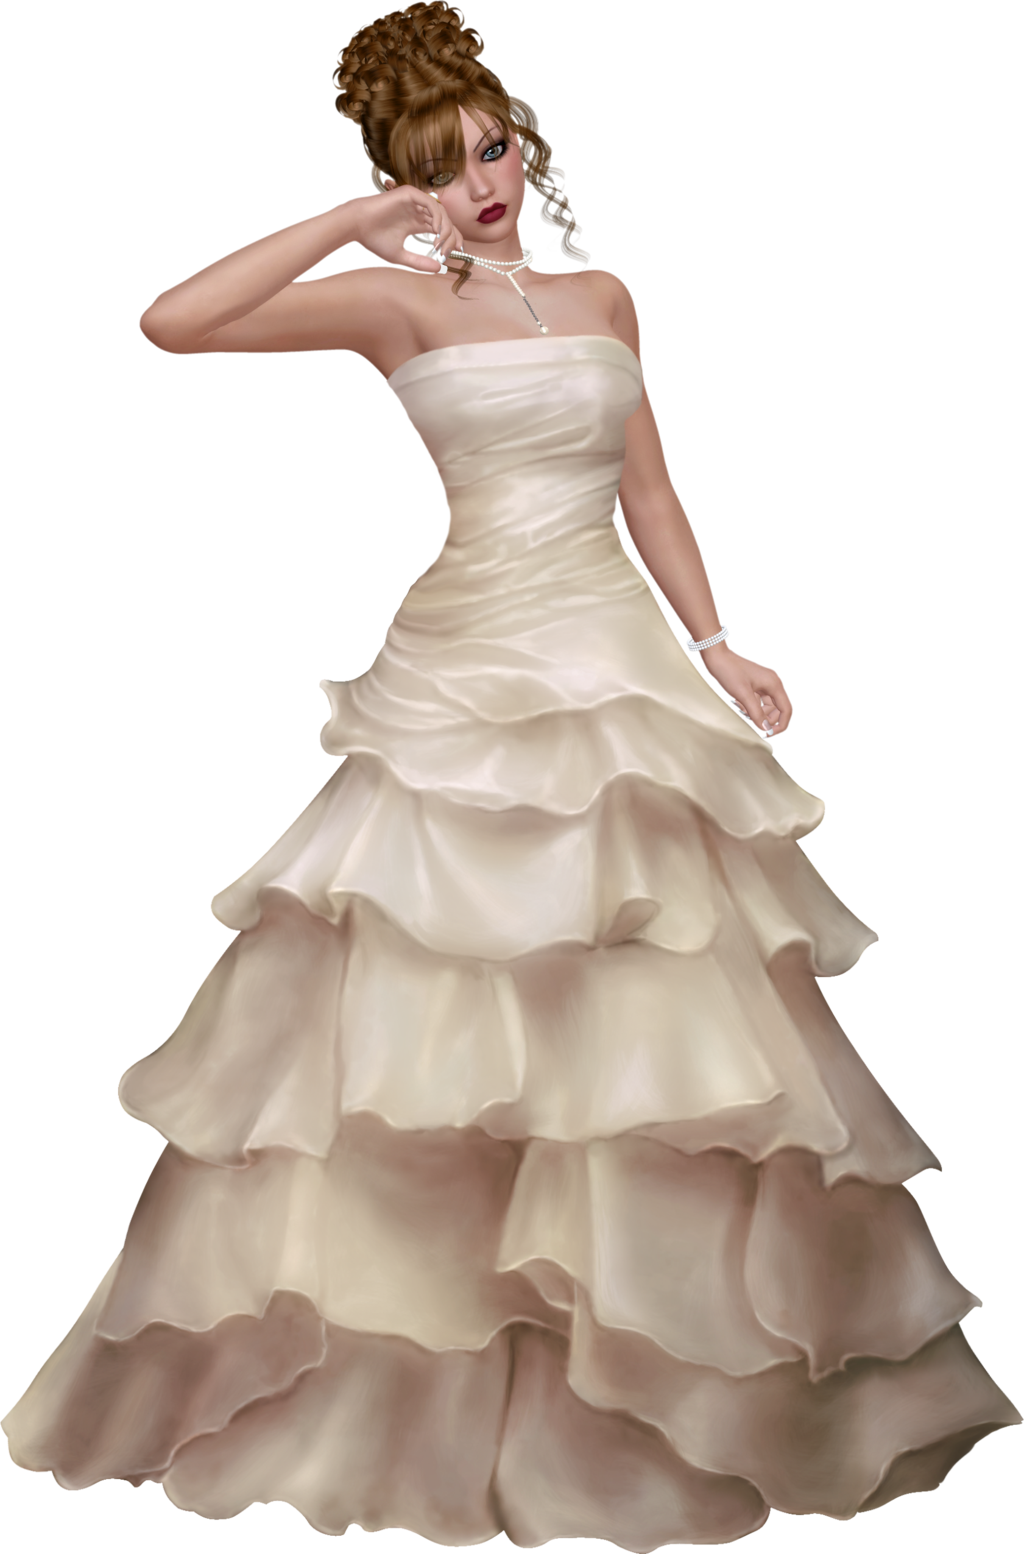 Animated Bride PNG Image